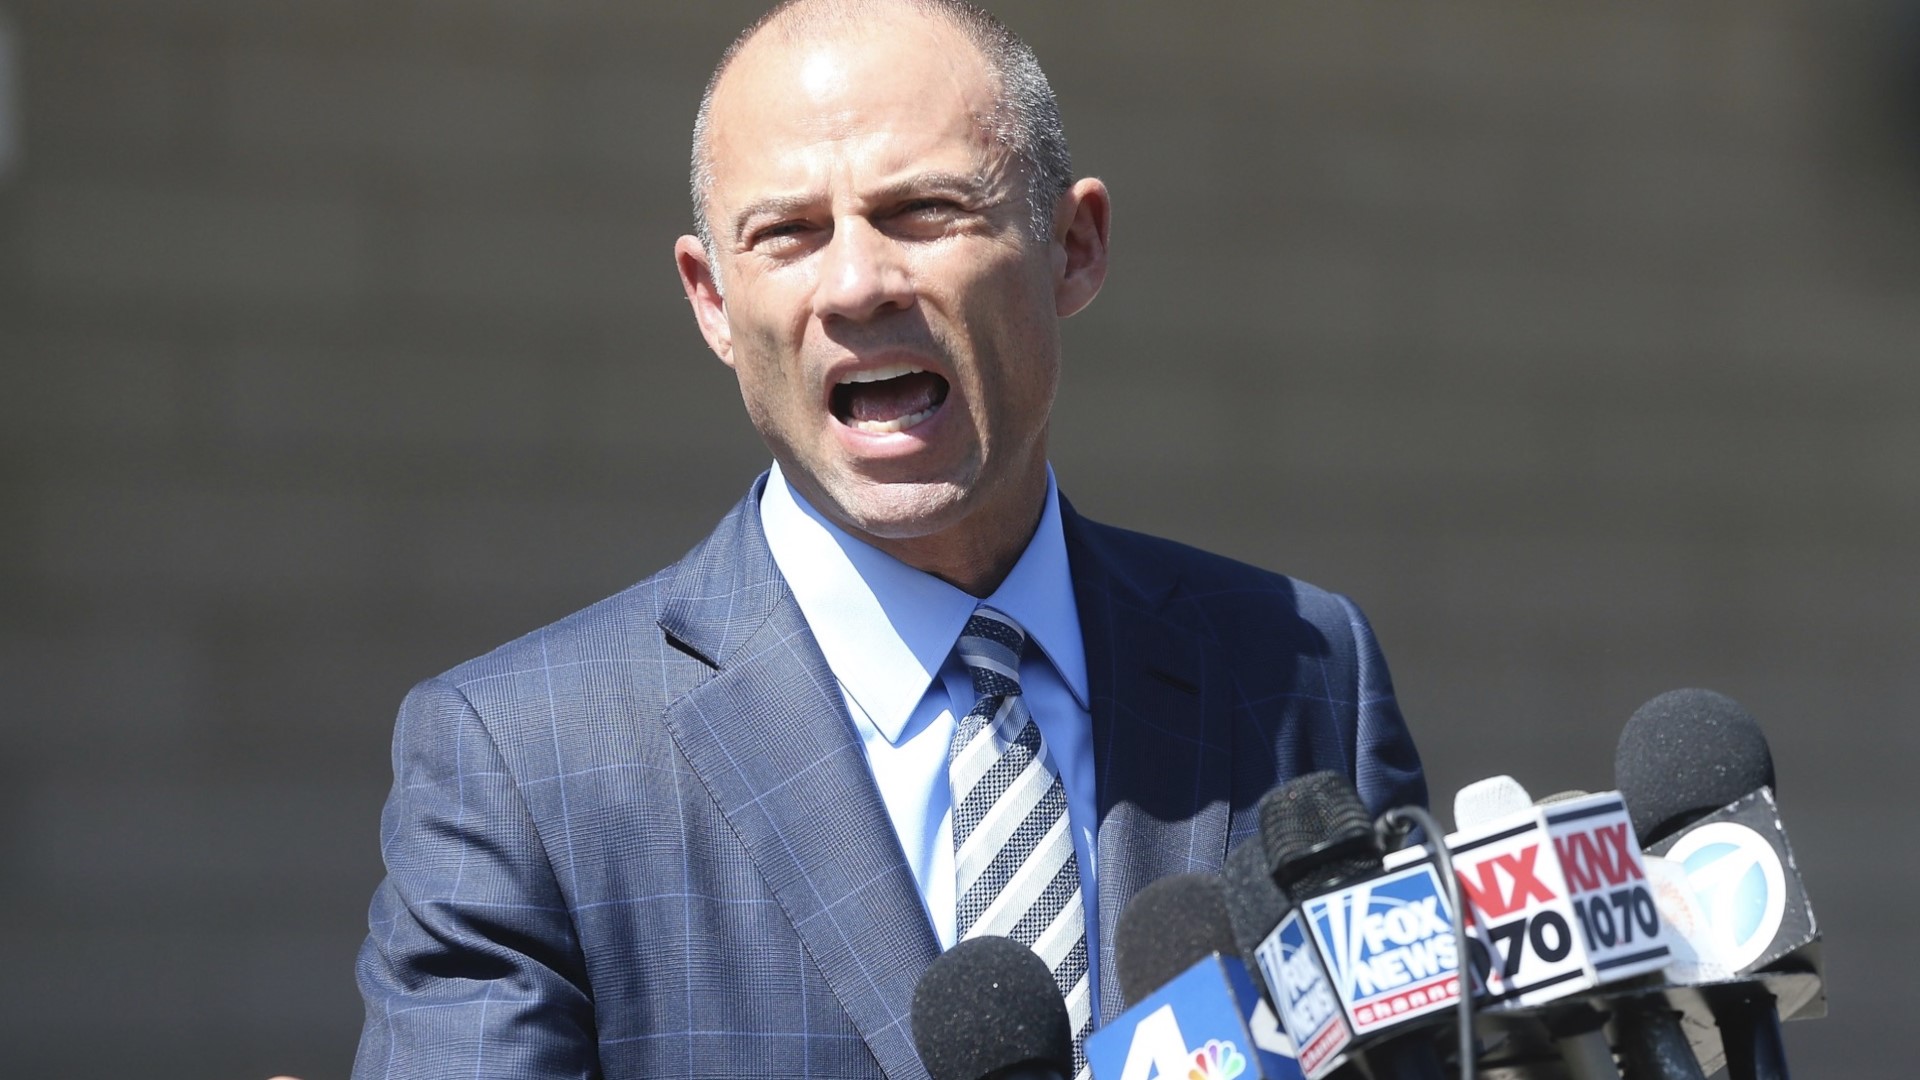 From representing a pornstar against President Trump to exploring a 2020 White House bid himself, famous attorney Michael Avenatti finds himself in the spotlight over his own legal woes. Veuer's Justin Kircher has more.